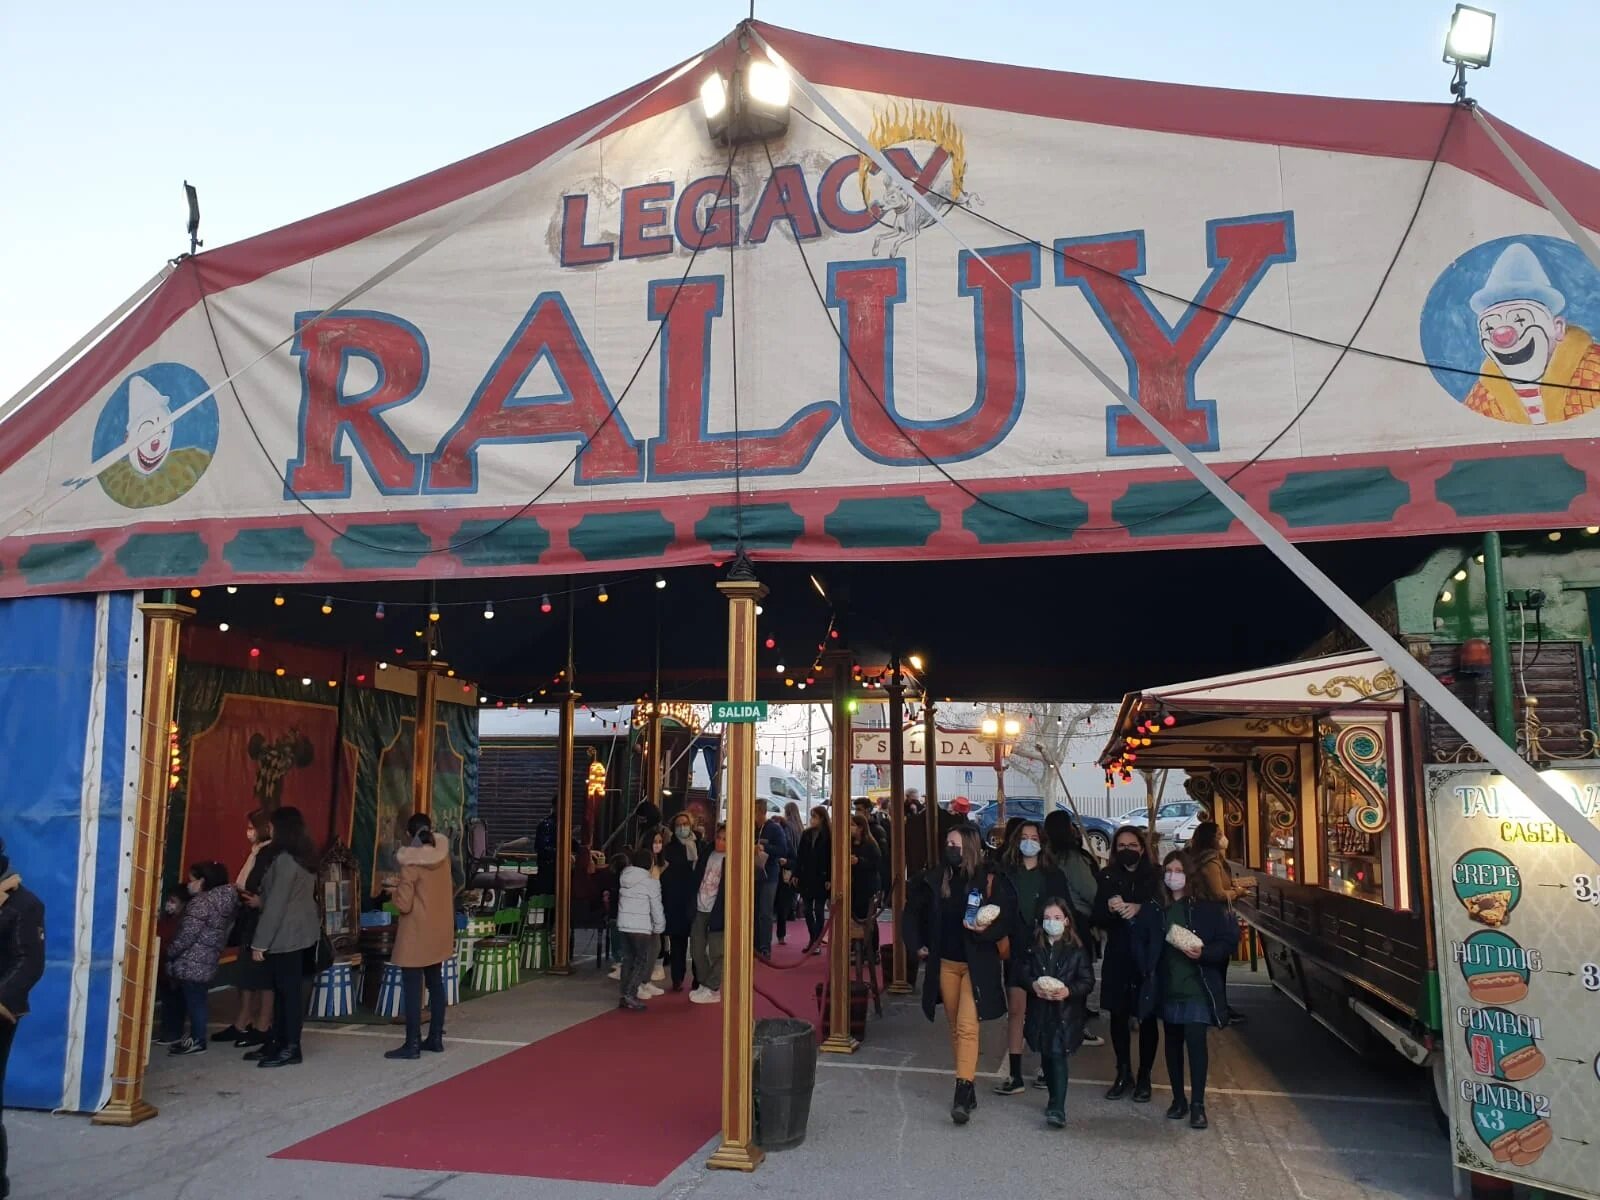 10-facts-you-must-know-about-circo-raluy-legacy